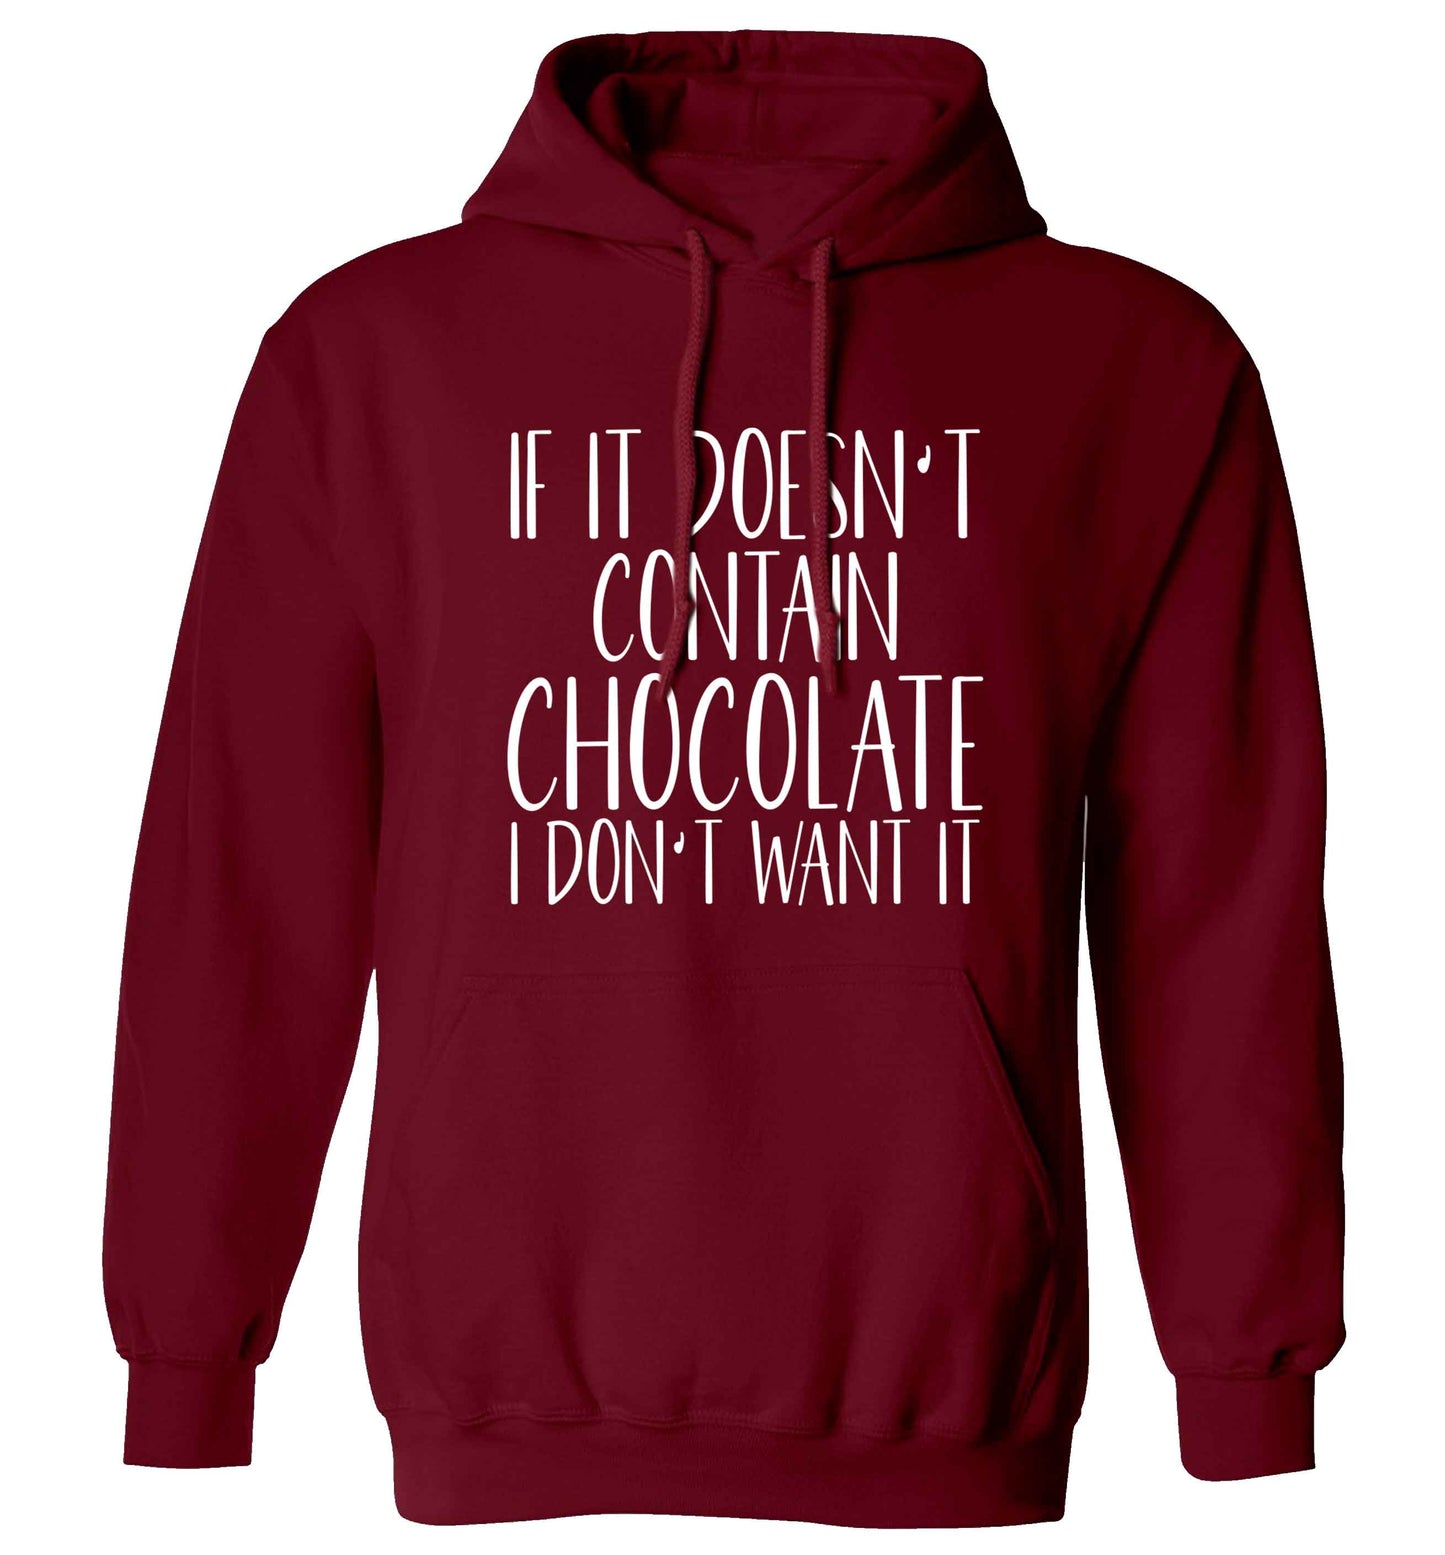 If it doesn't contain chocolate I don't want it adults unisex maroon hoodie 2XL